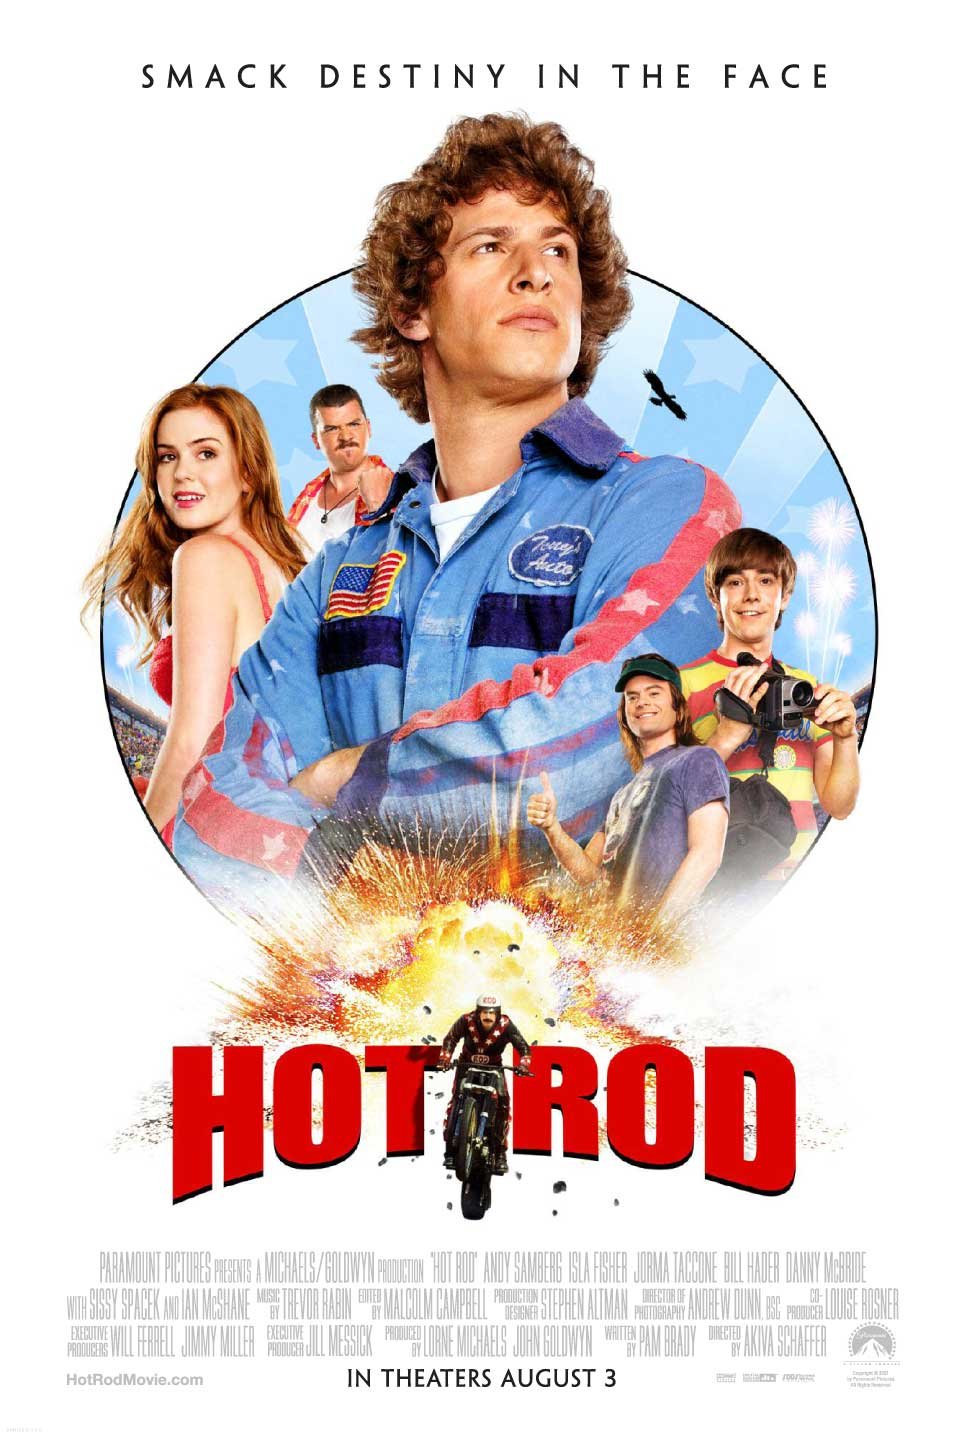 christian movie review hot rod